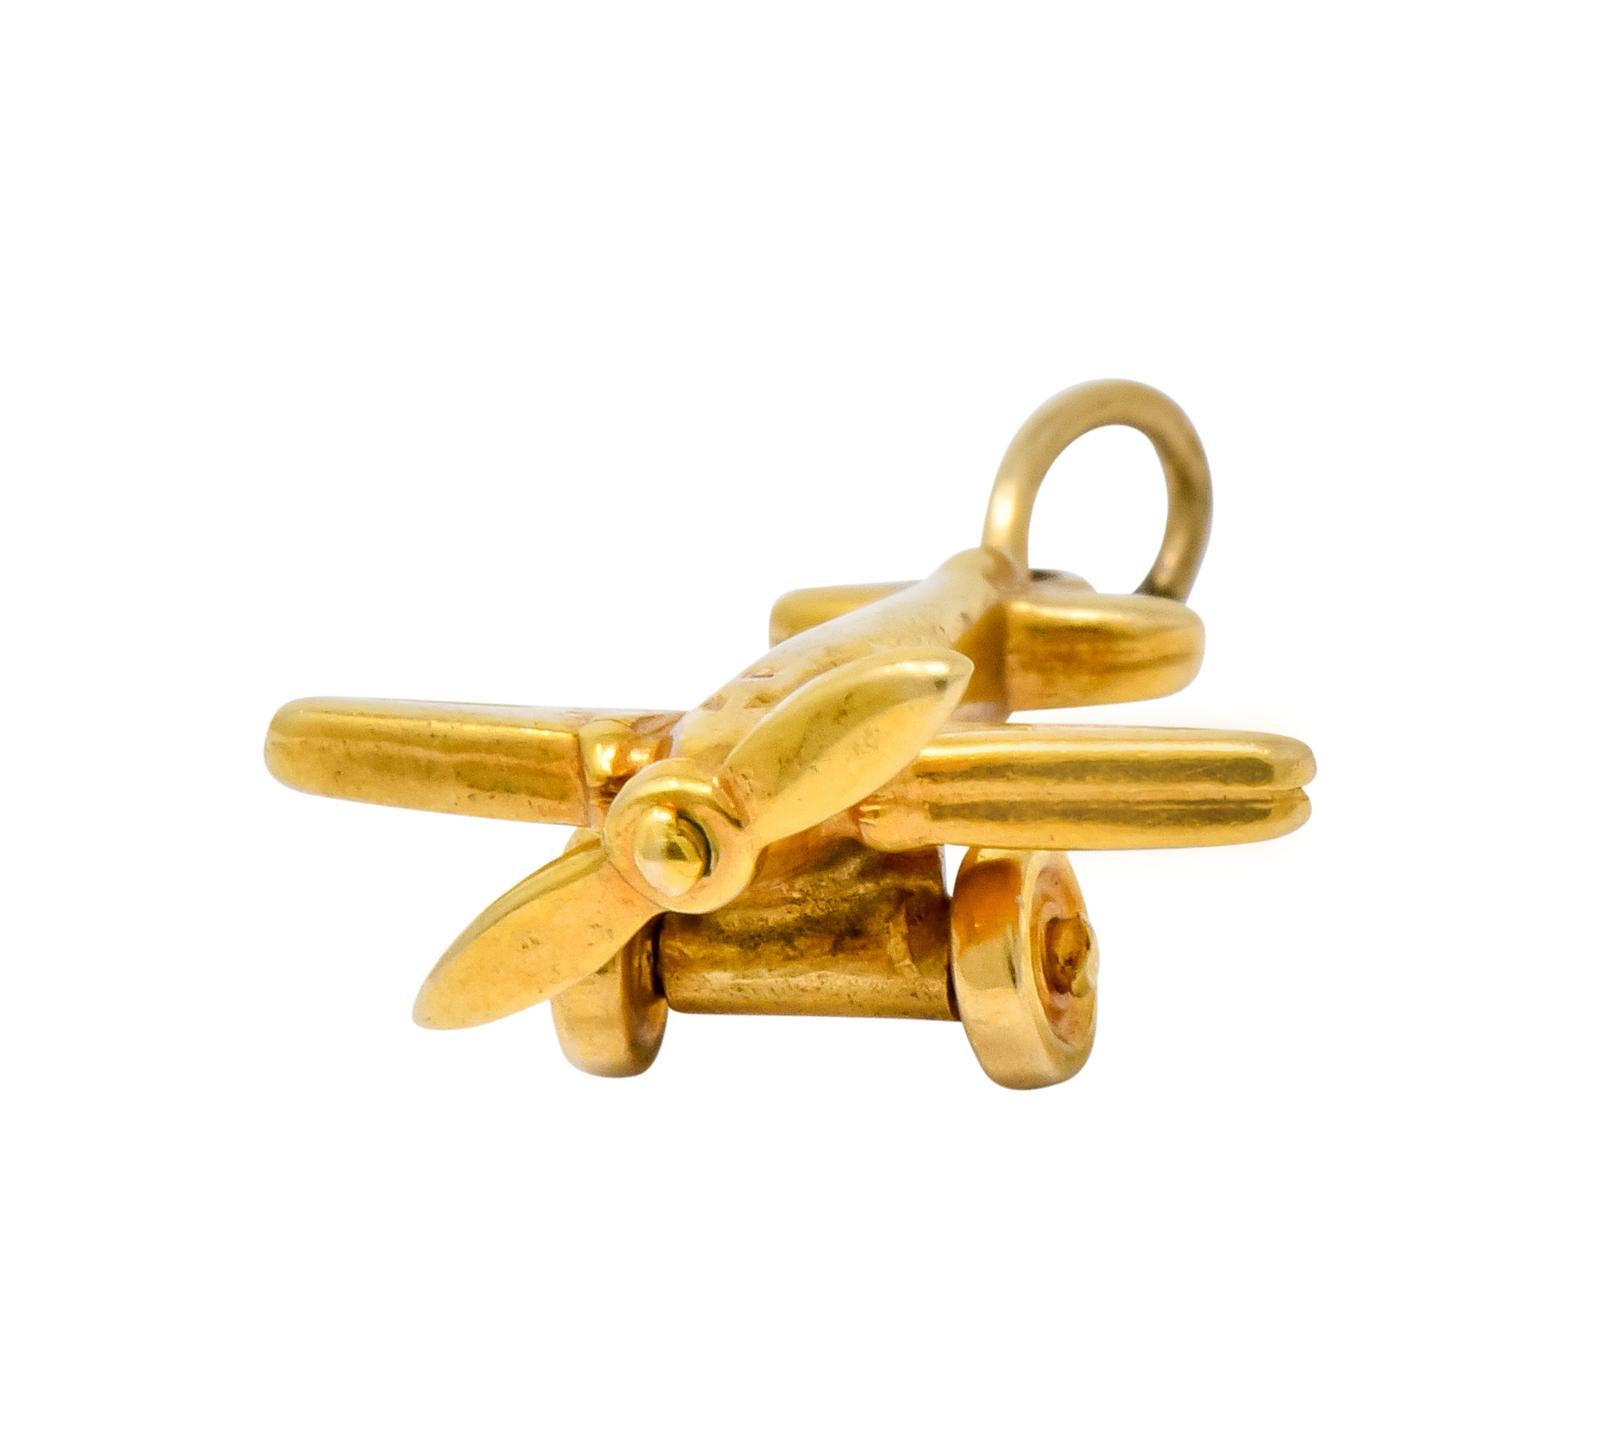 Charm designed as a propeller plane with engraved details and articulated wheels

Completed by jump ring bale

Stamped 14K for 14 karat gold

Circa: 1930s

Measures: 5/8 x 3/4 inch (including bale)

Total weight: 1.3 grams

Soaring. Fearless.